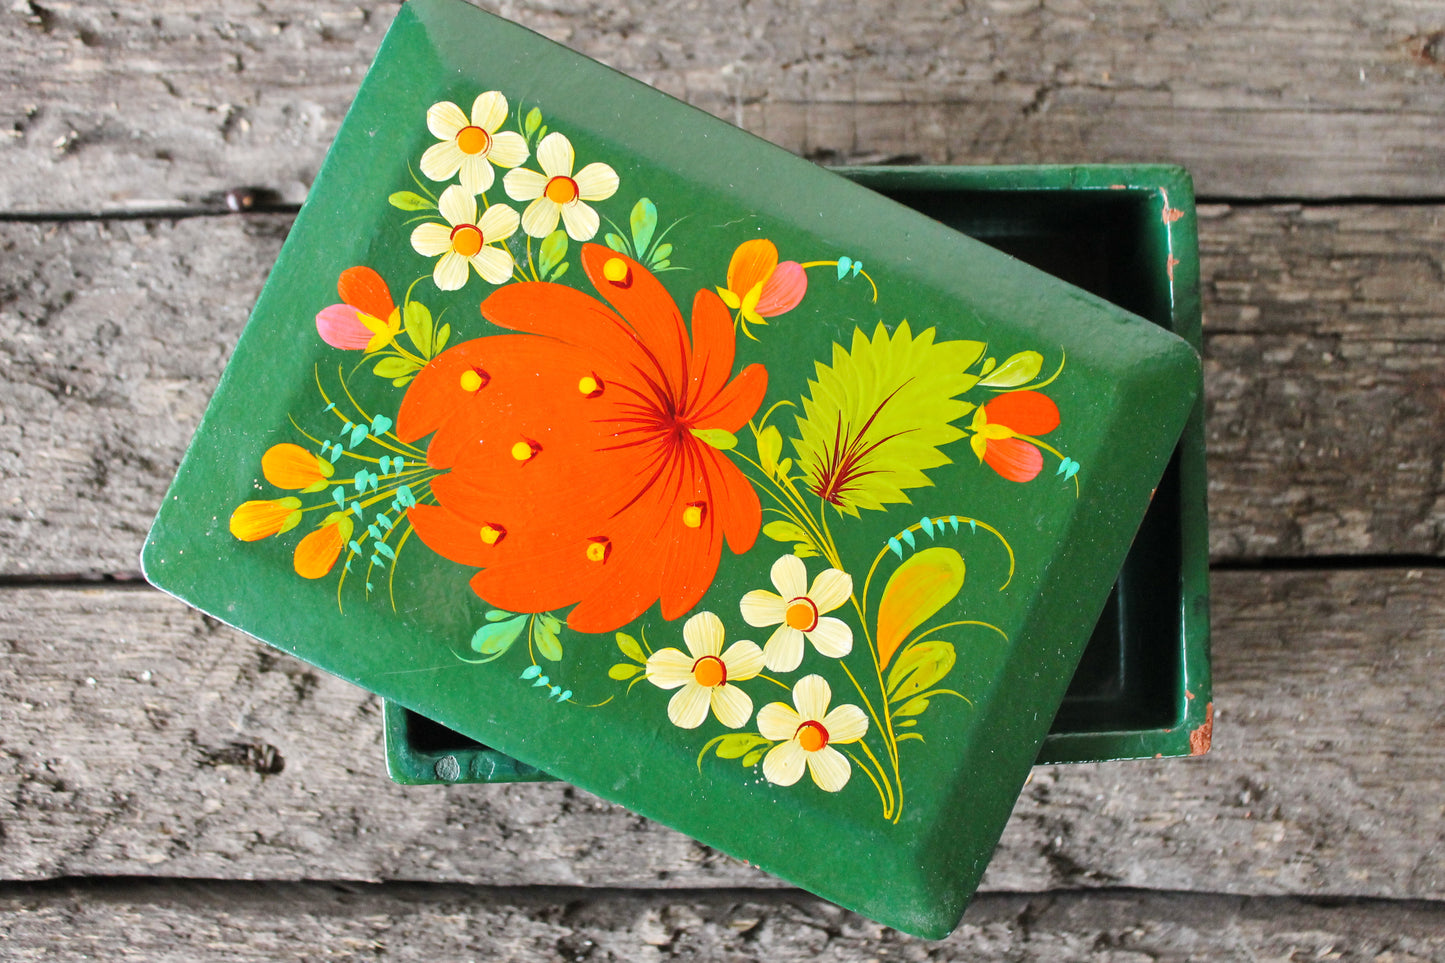 Vintage jewelry green wooden box - Petrykivka box - 6.1 inches - USSR vintage - vintage flower box - made in Ukraine